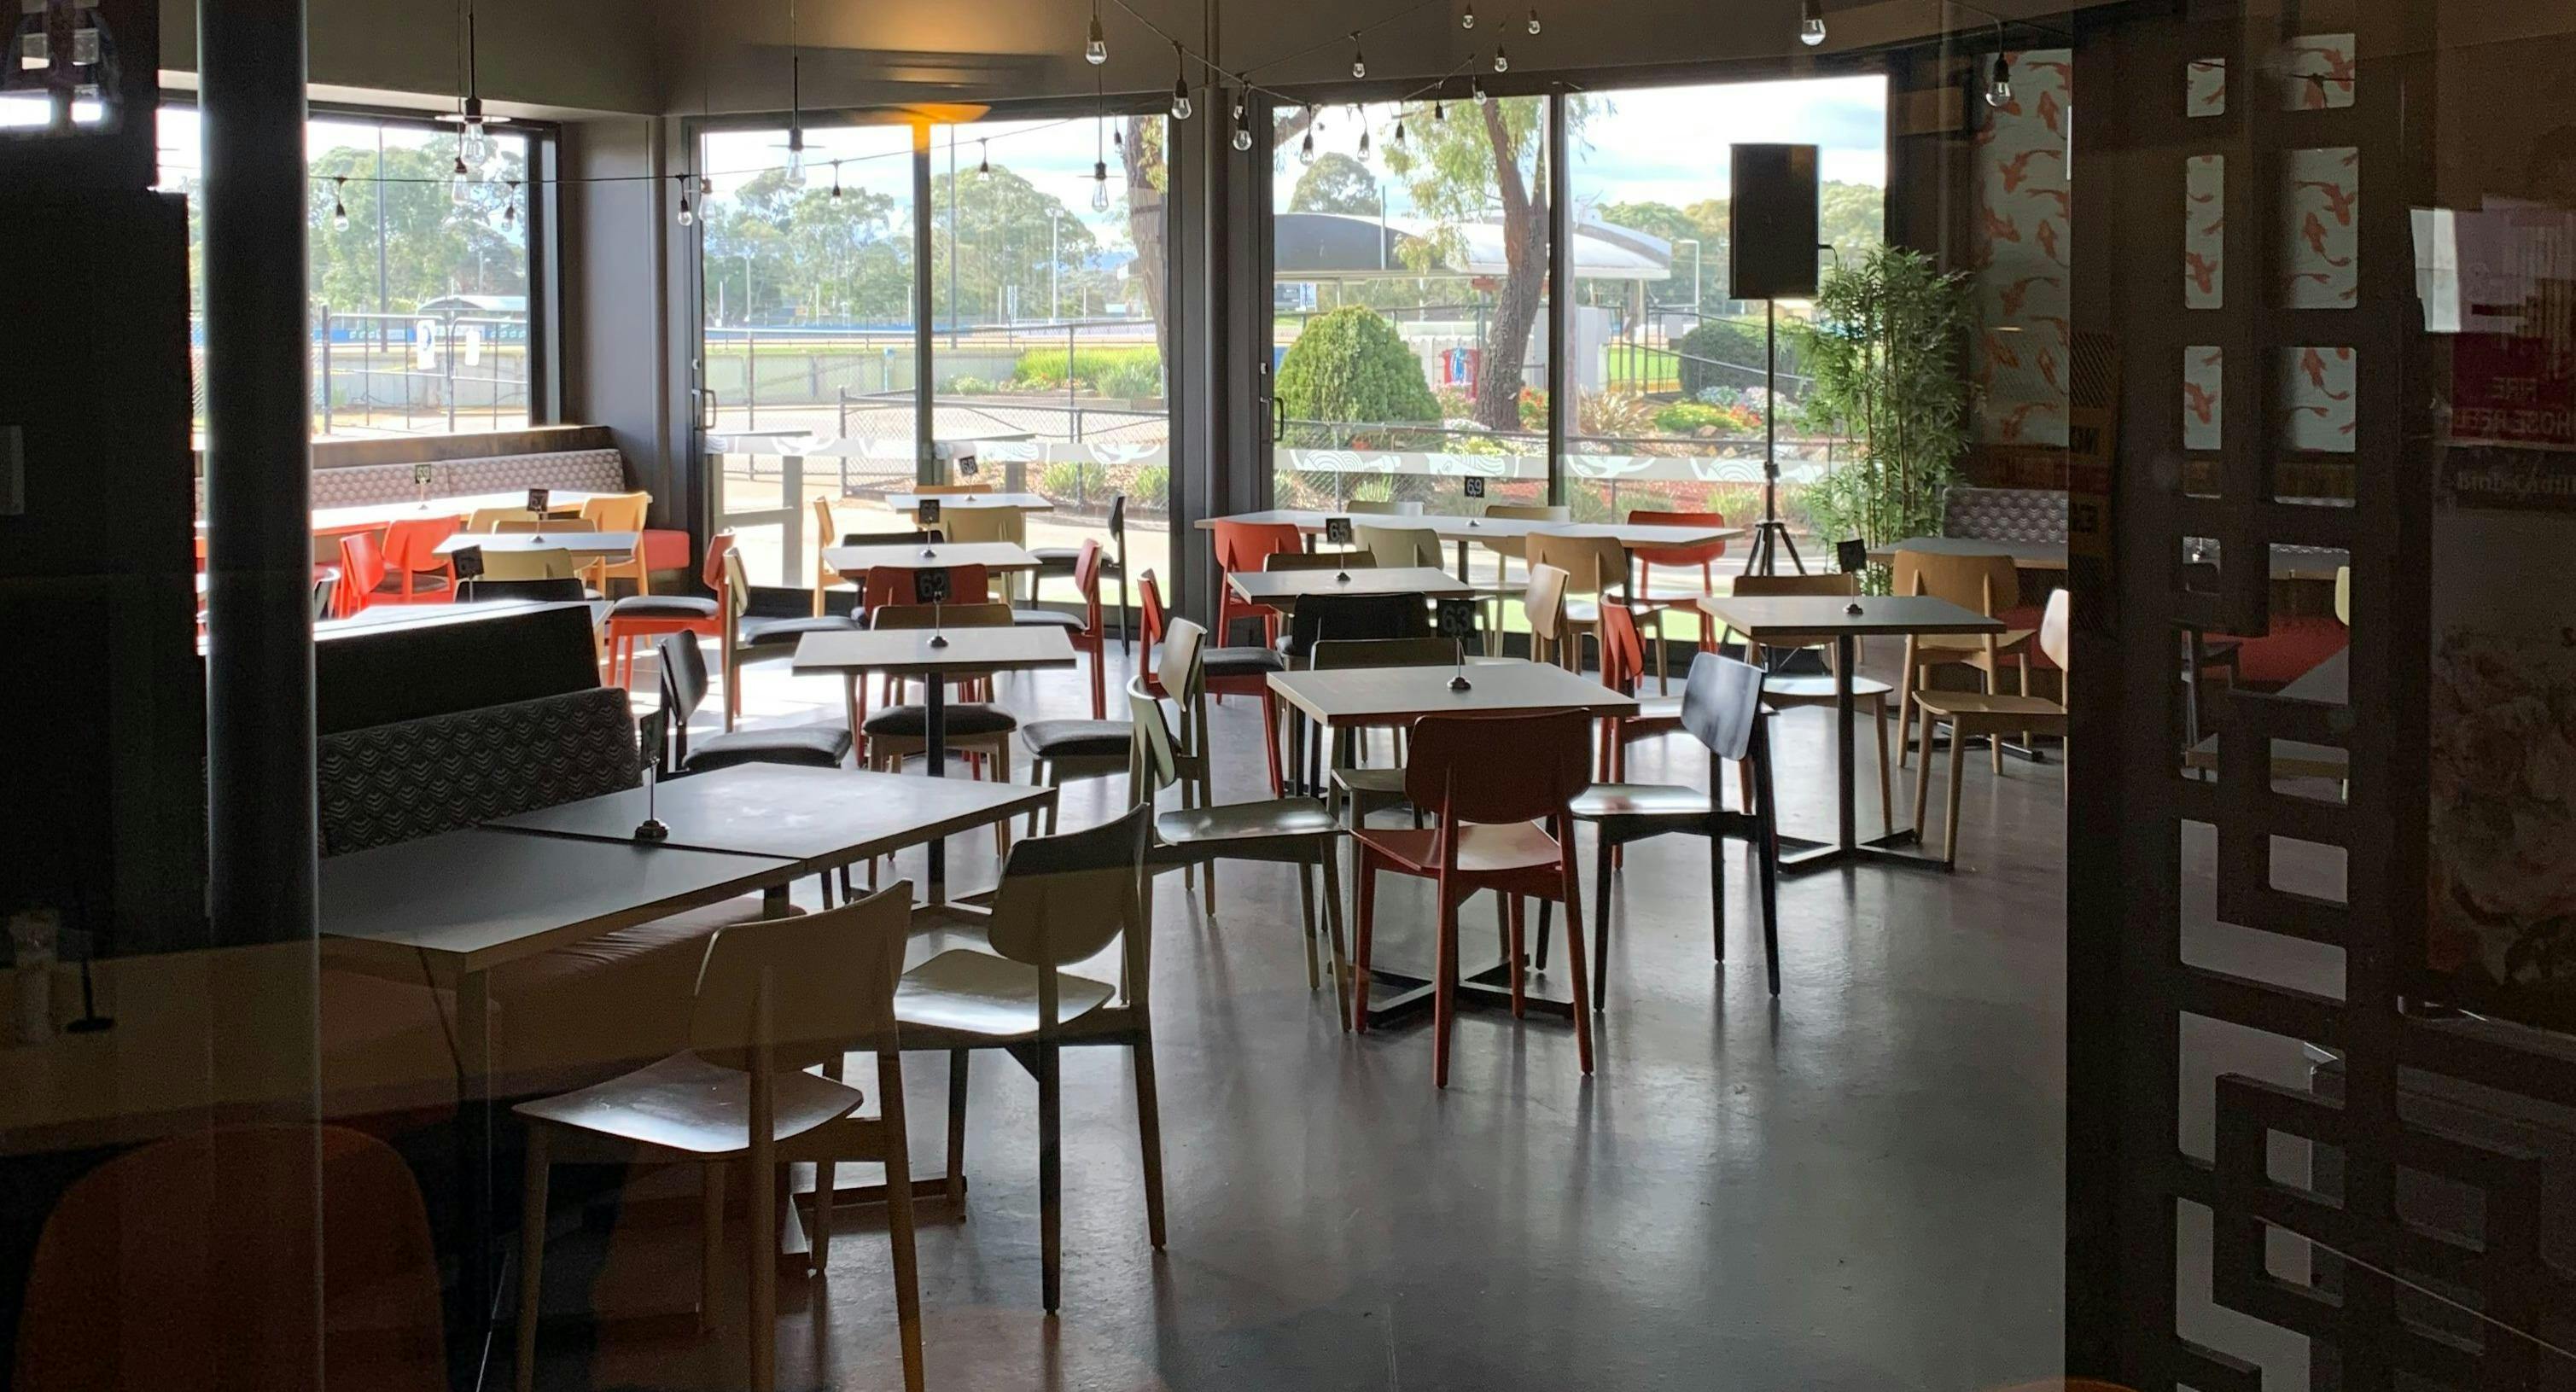 Photo of restaurant Greyhounds Entertainment in Dandenong, Melbourne